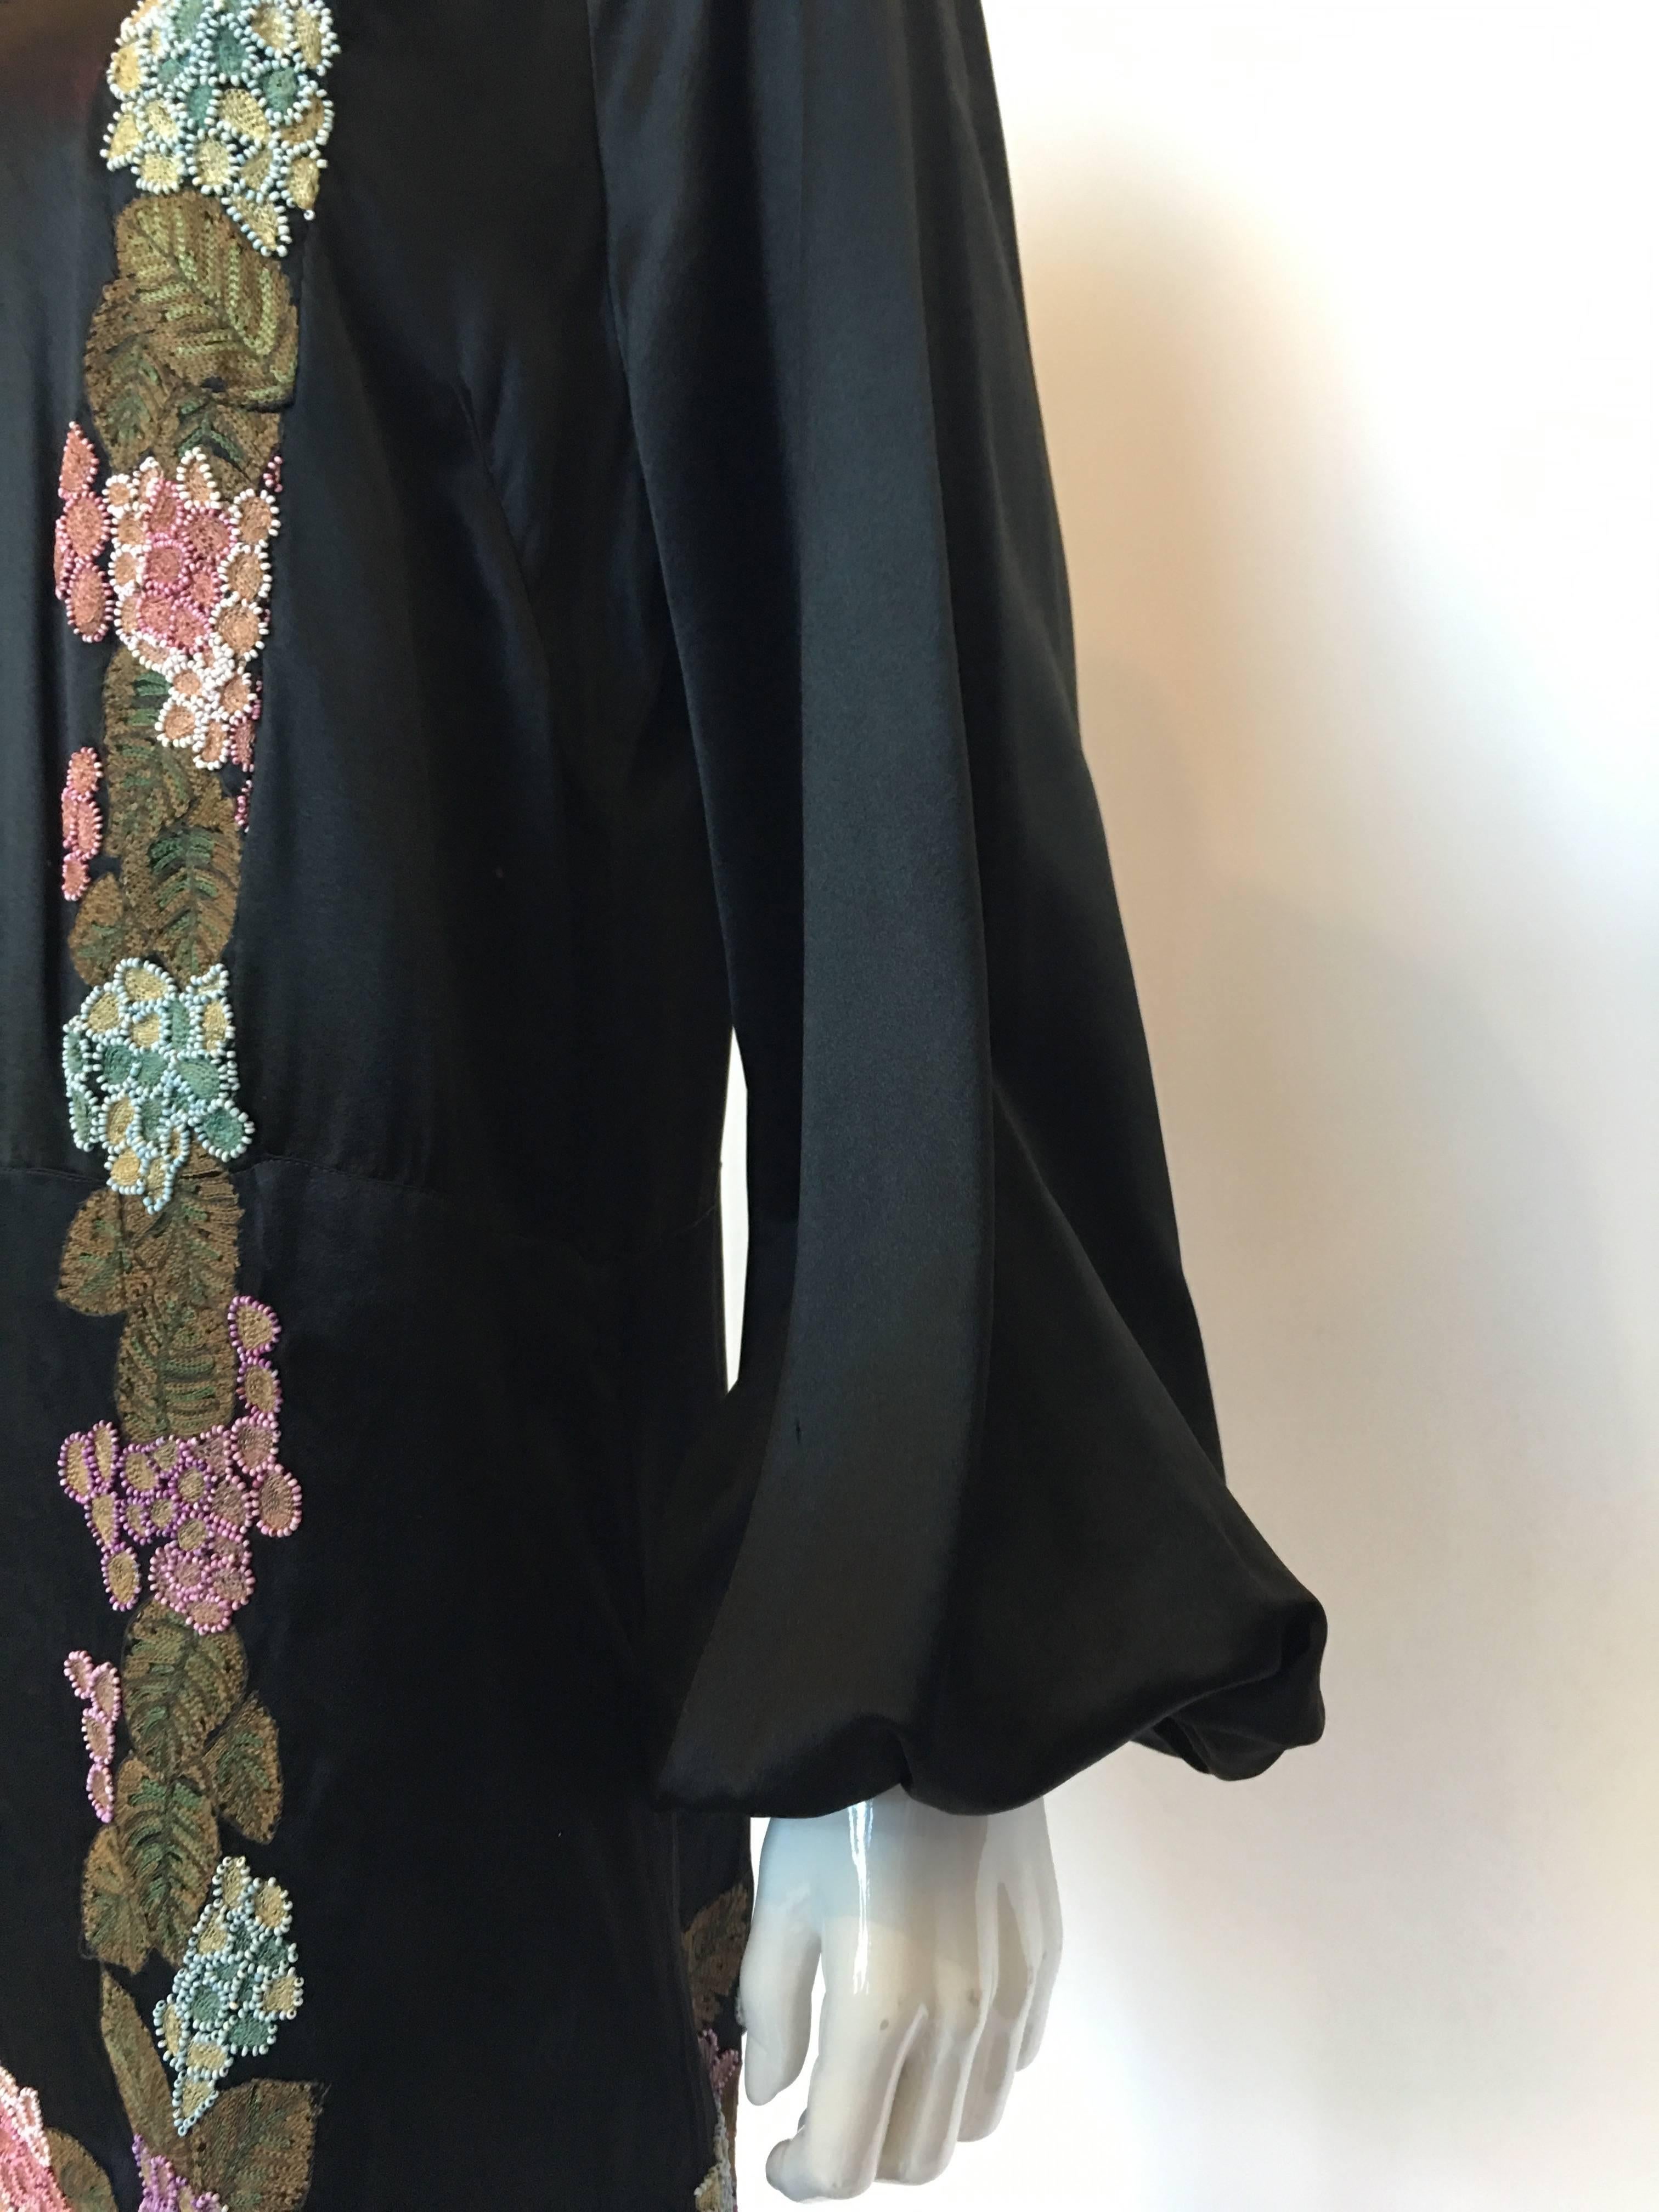 Handmade Black Silk Embroidered and Beaded Floral Trim Dress, 1920s 2